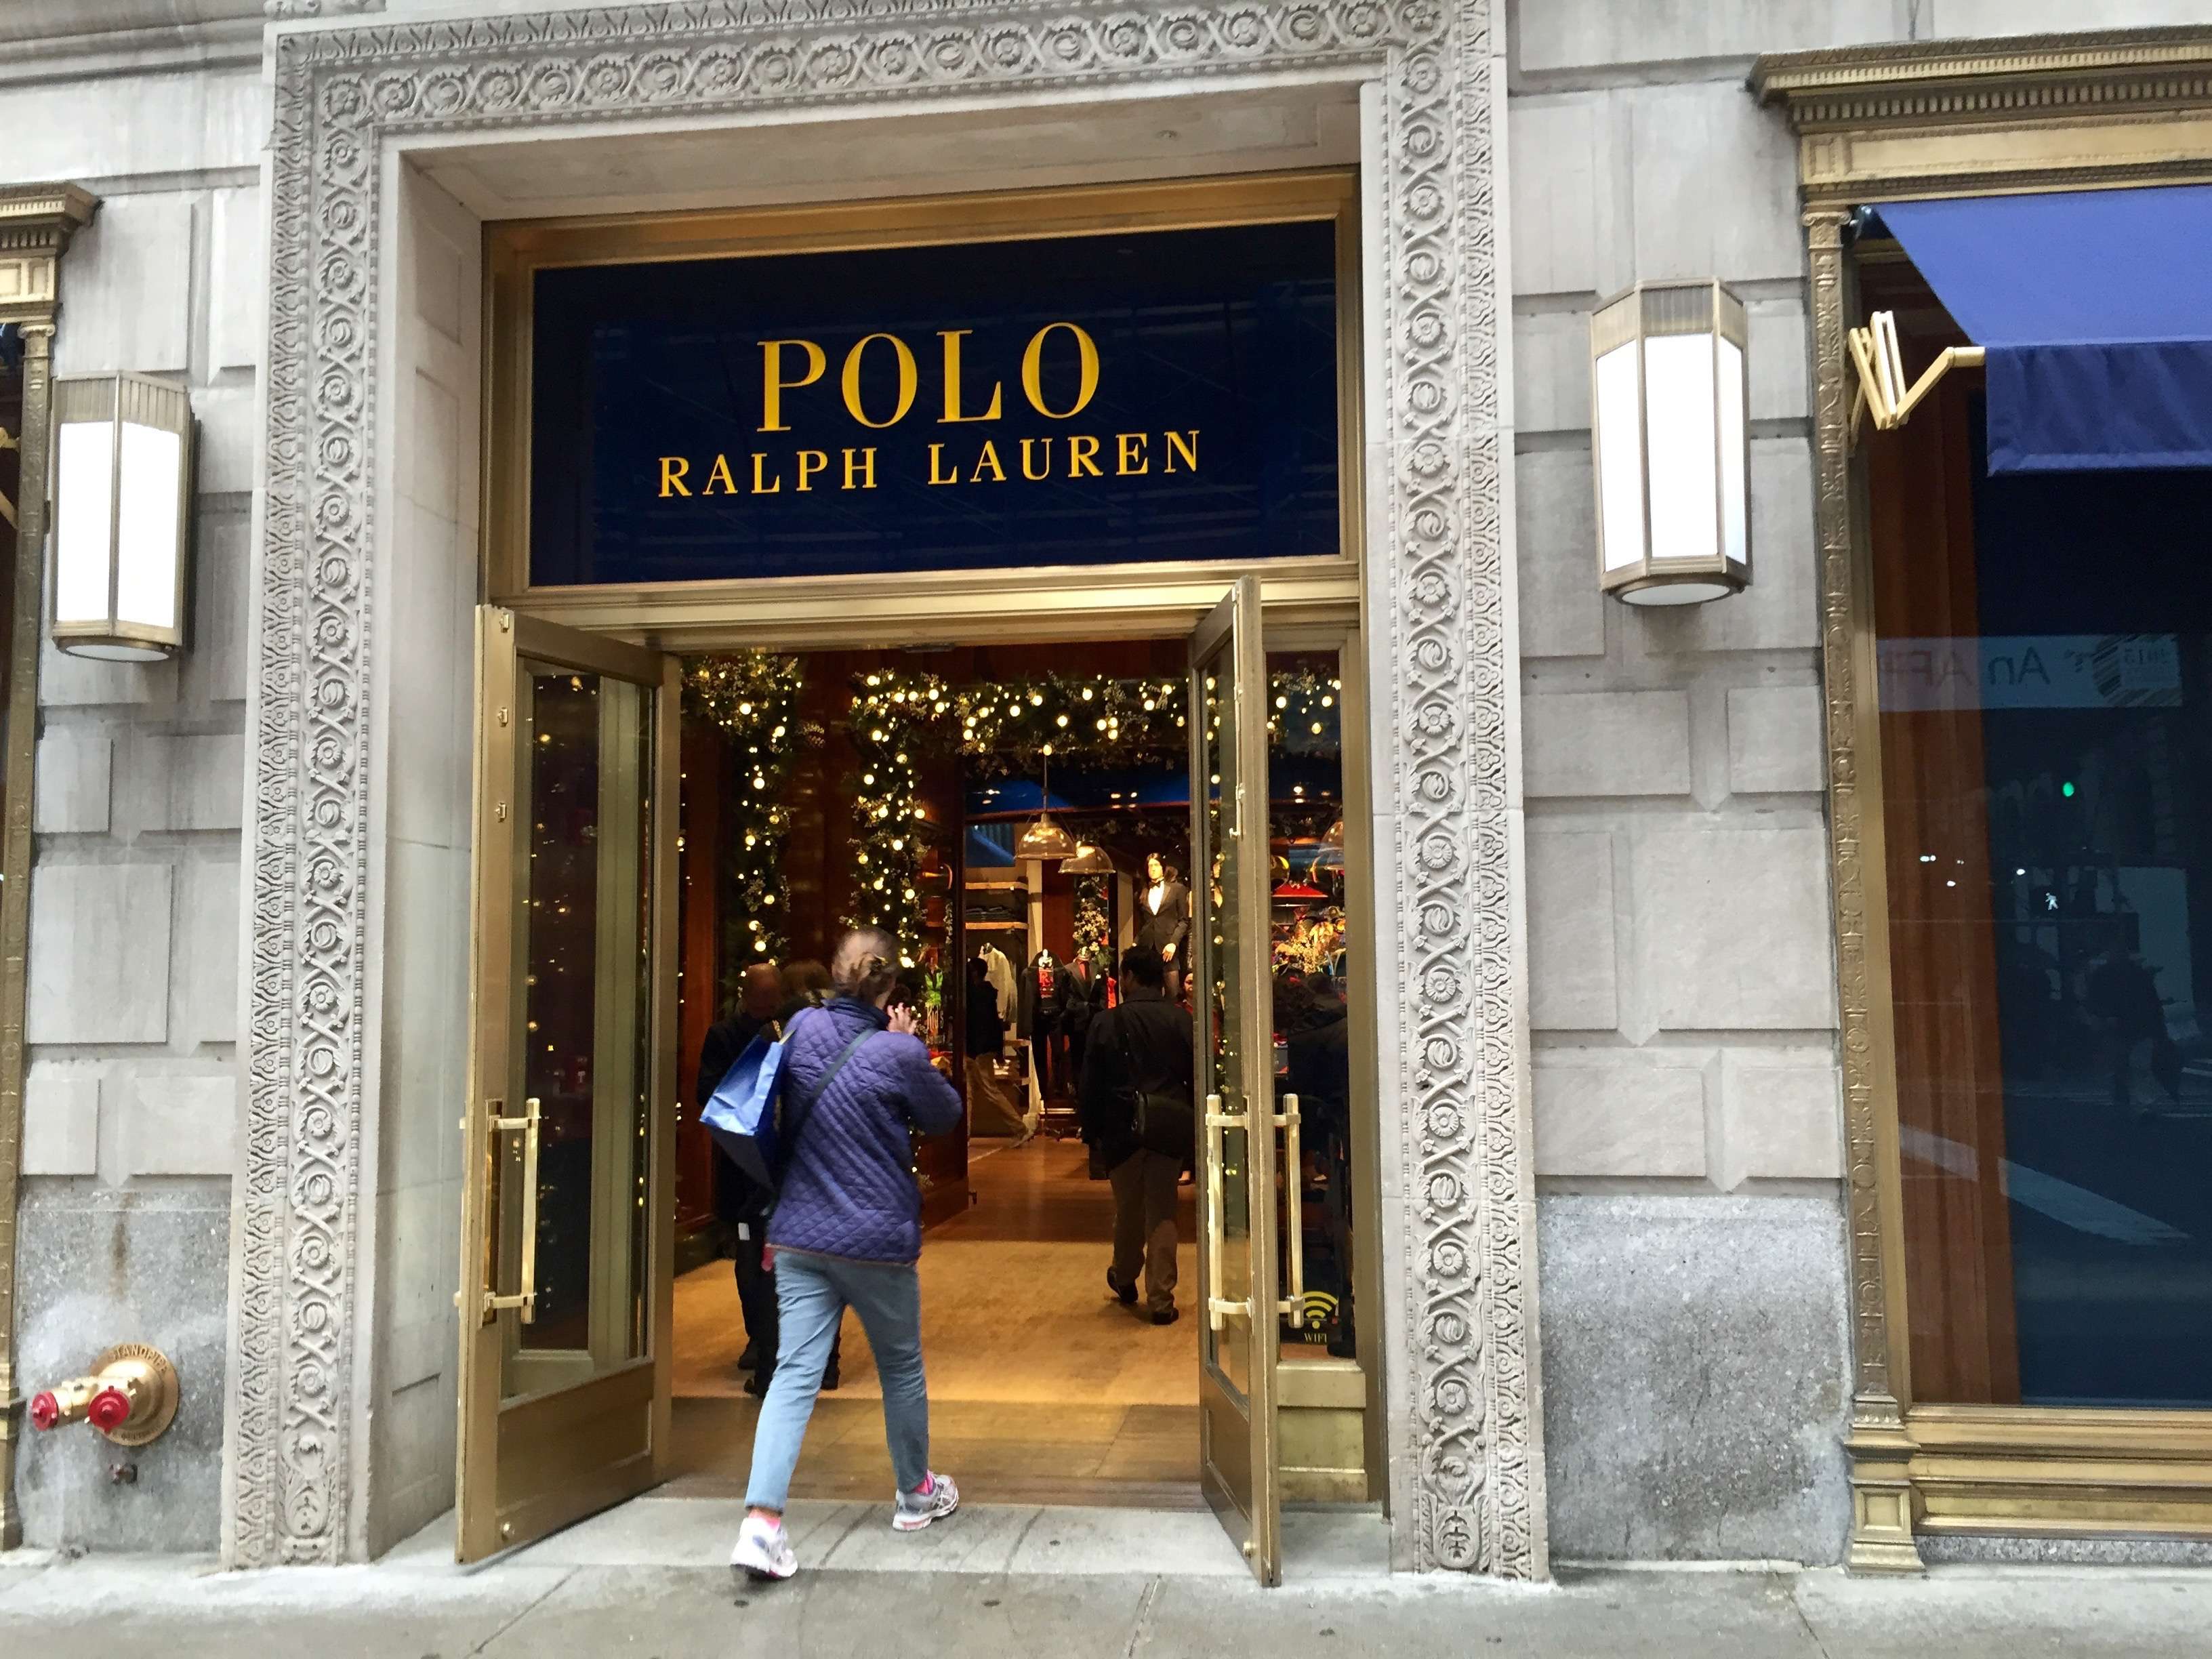 I tried the new fitting room at Ralph Lauren - and it blew my mind